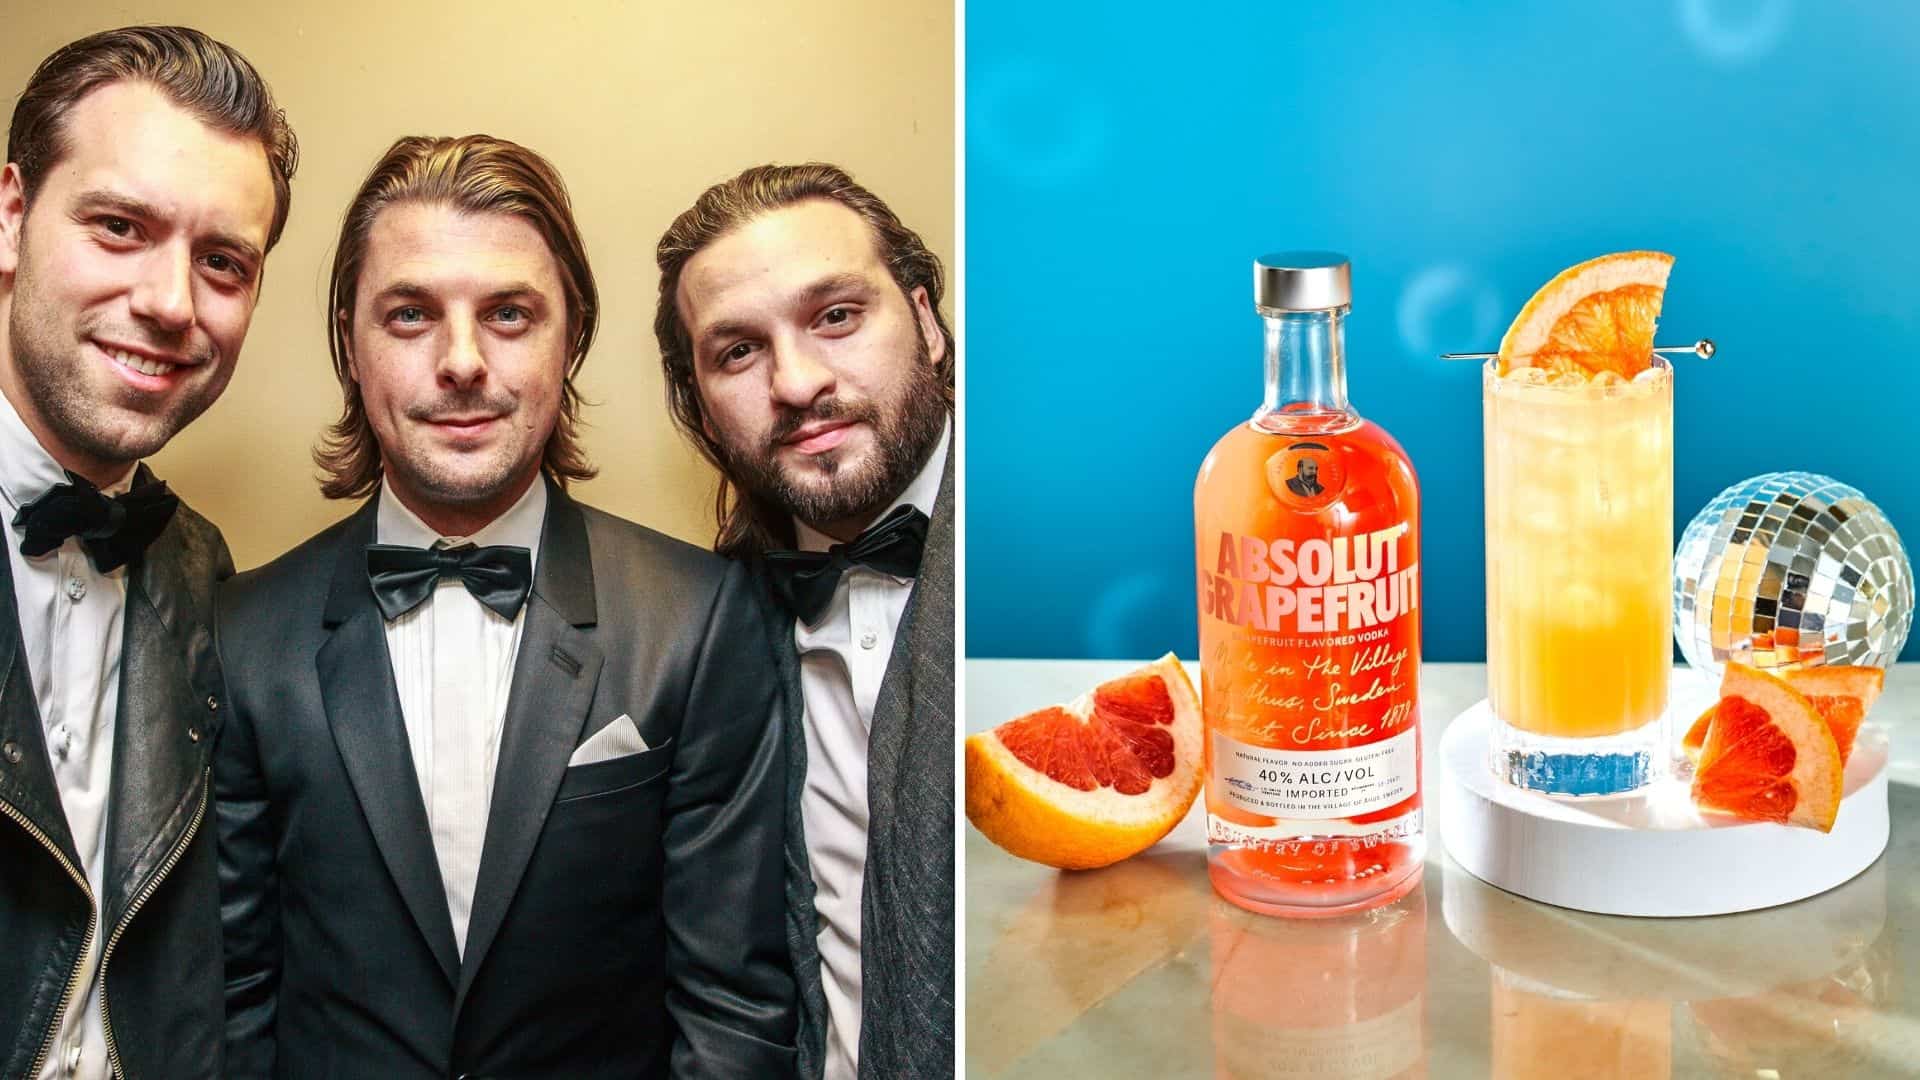 Swedish House Mafia is collaborating with Absolut Vodka on new themed cocktails